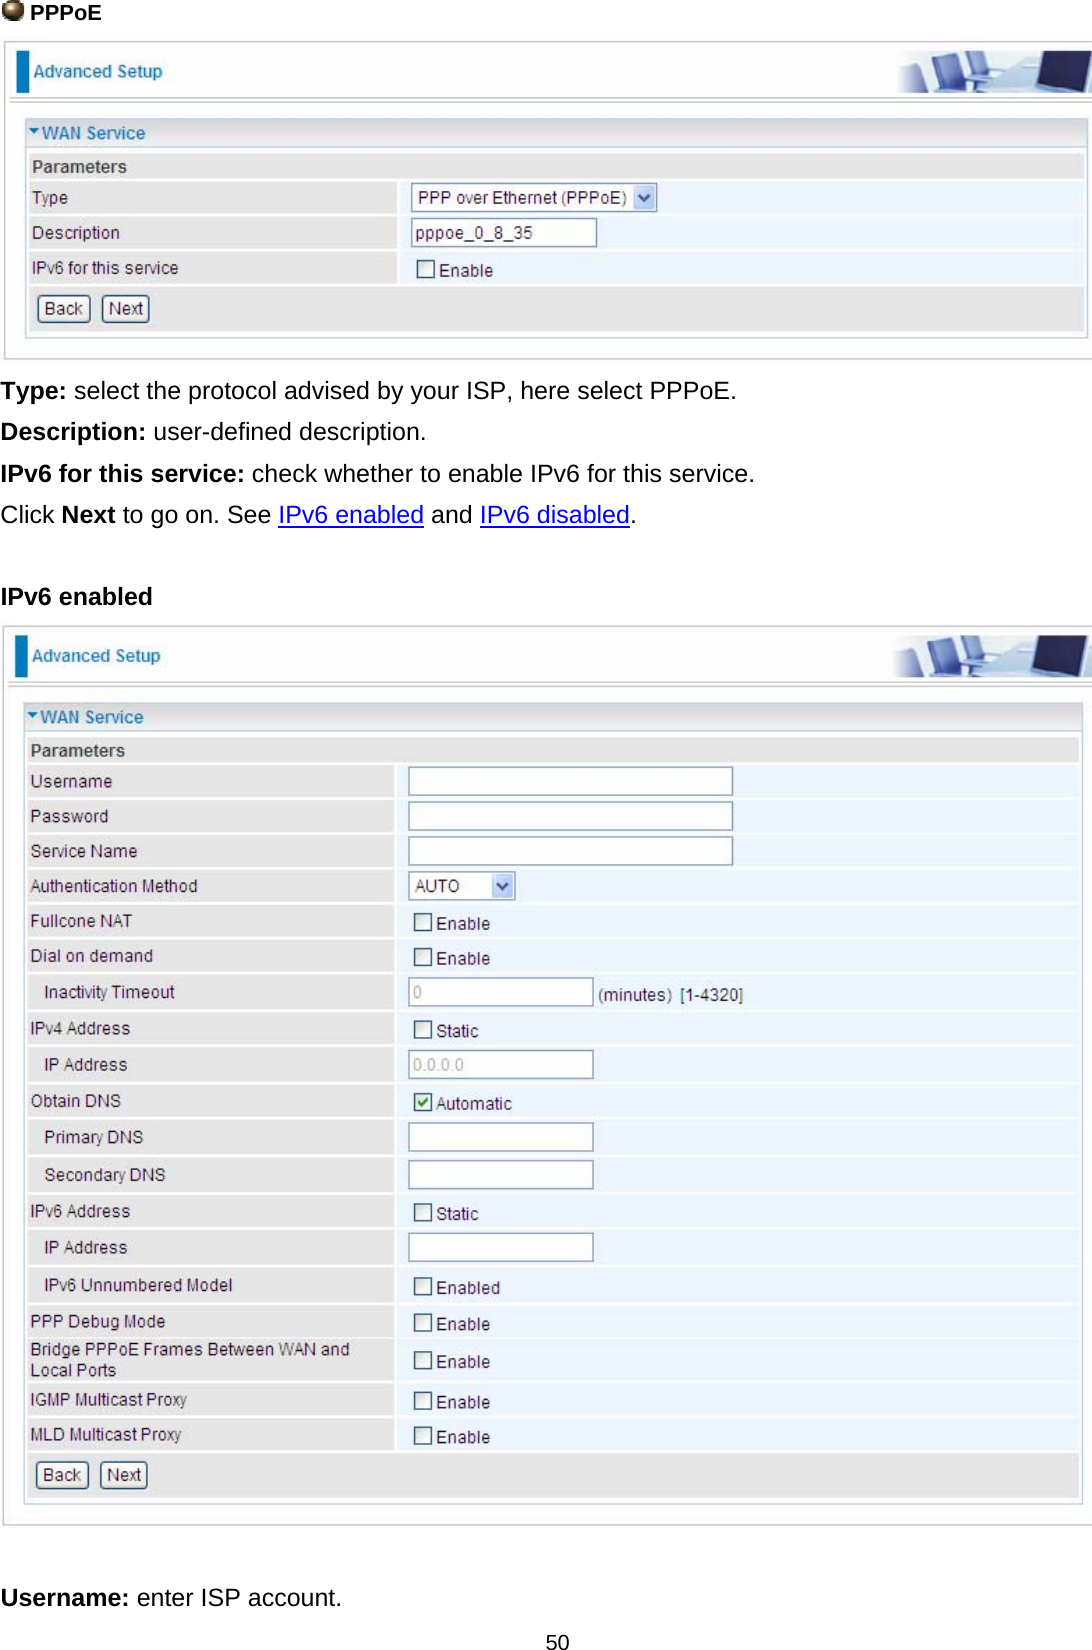  50  PPPoE  Type: select the protocol advised by your ISP, here select PPPoE. Description: user-defined description. IPv6 for this service: check whether to enable IPv6 for this service. Click Next to go on. See IPv6 enabled and IPv6 disabled.  IPv6 enabled   Username: enter ISP account. 